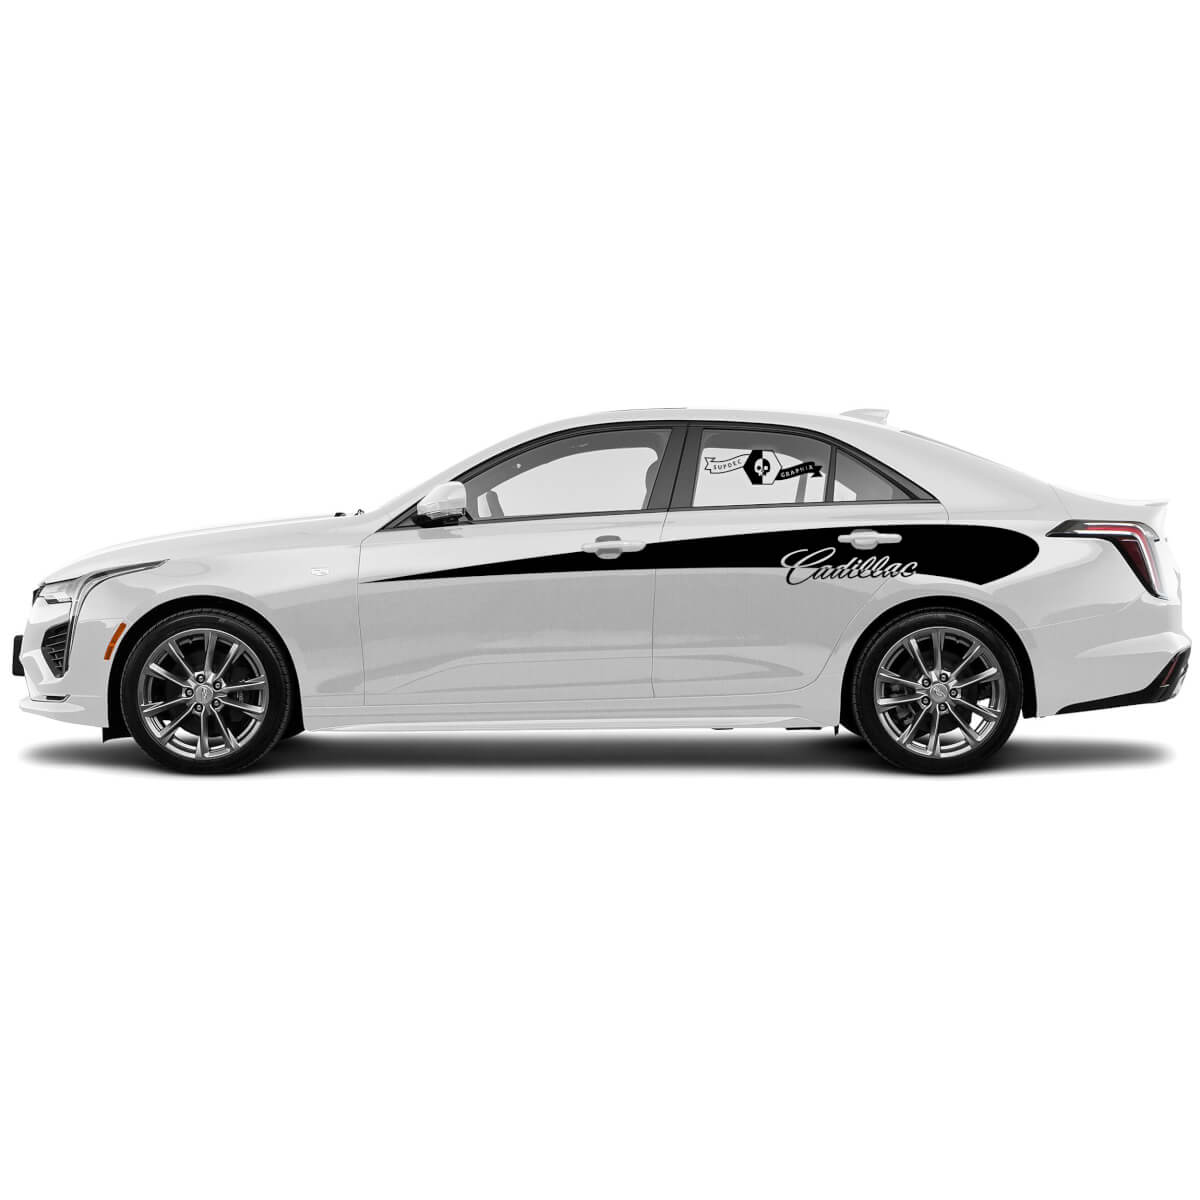 2 New Decal Sticker Stylish Up Doors Accent Side Wrap vinyl Decal for Cadillac CT4